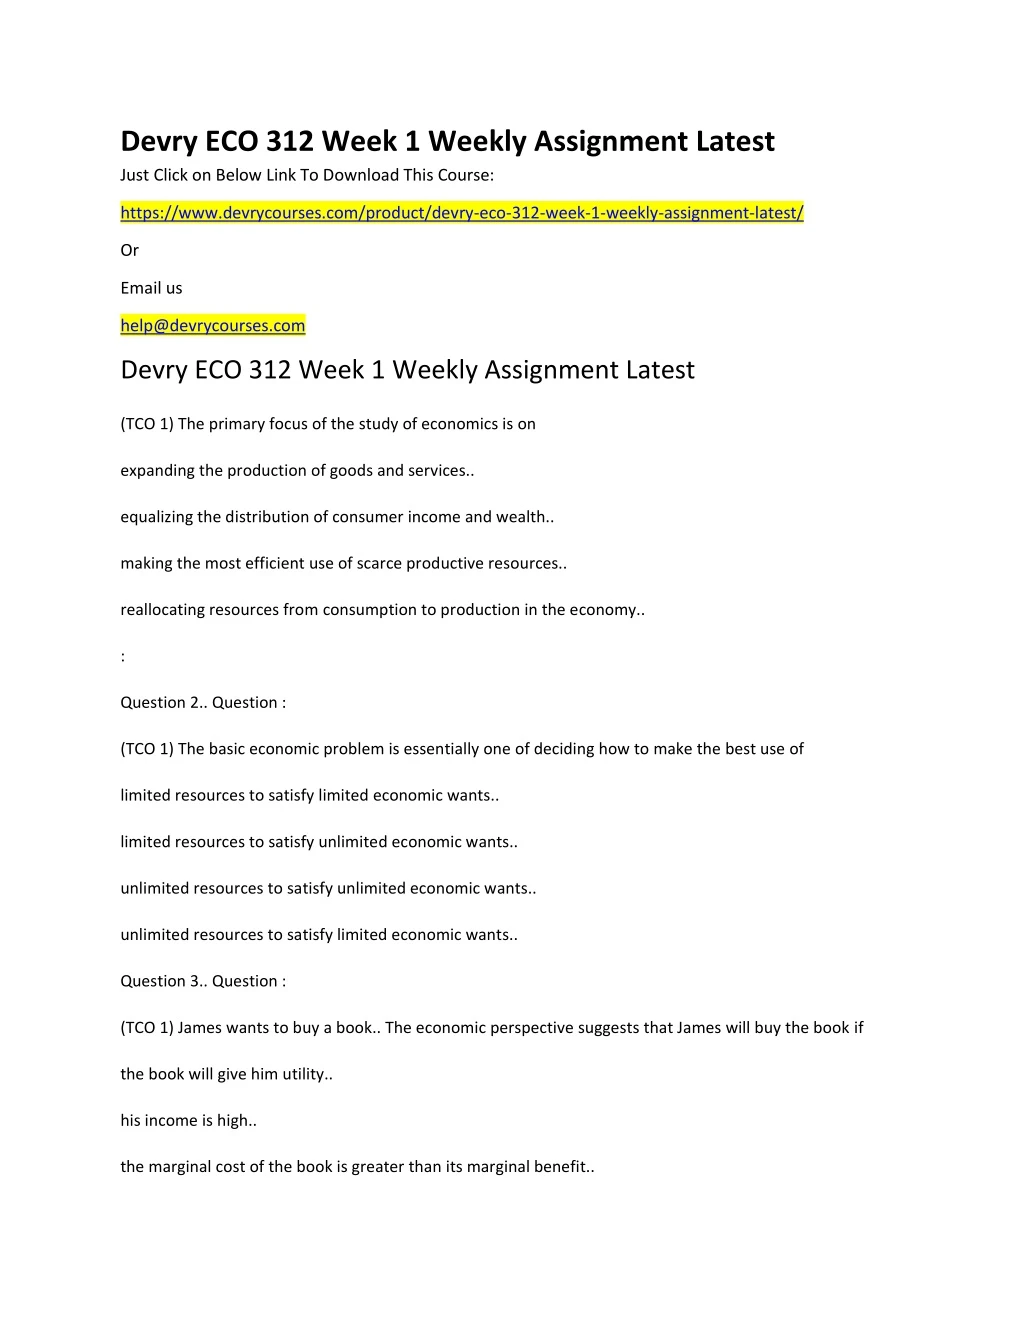 devry eco 312 week 1 weekly assignment latest